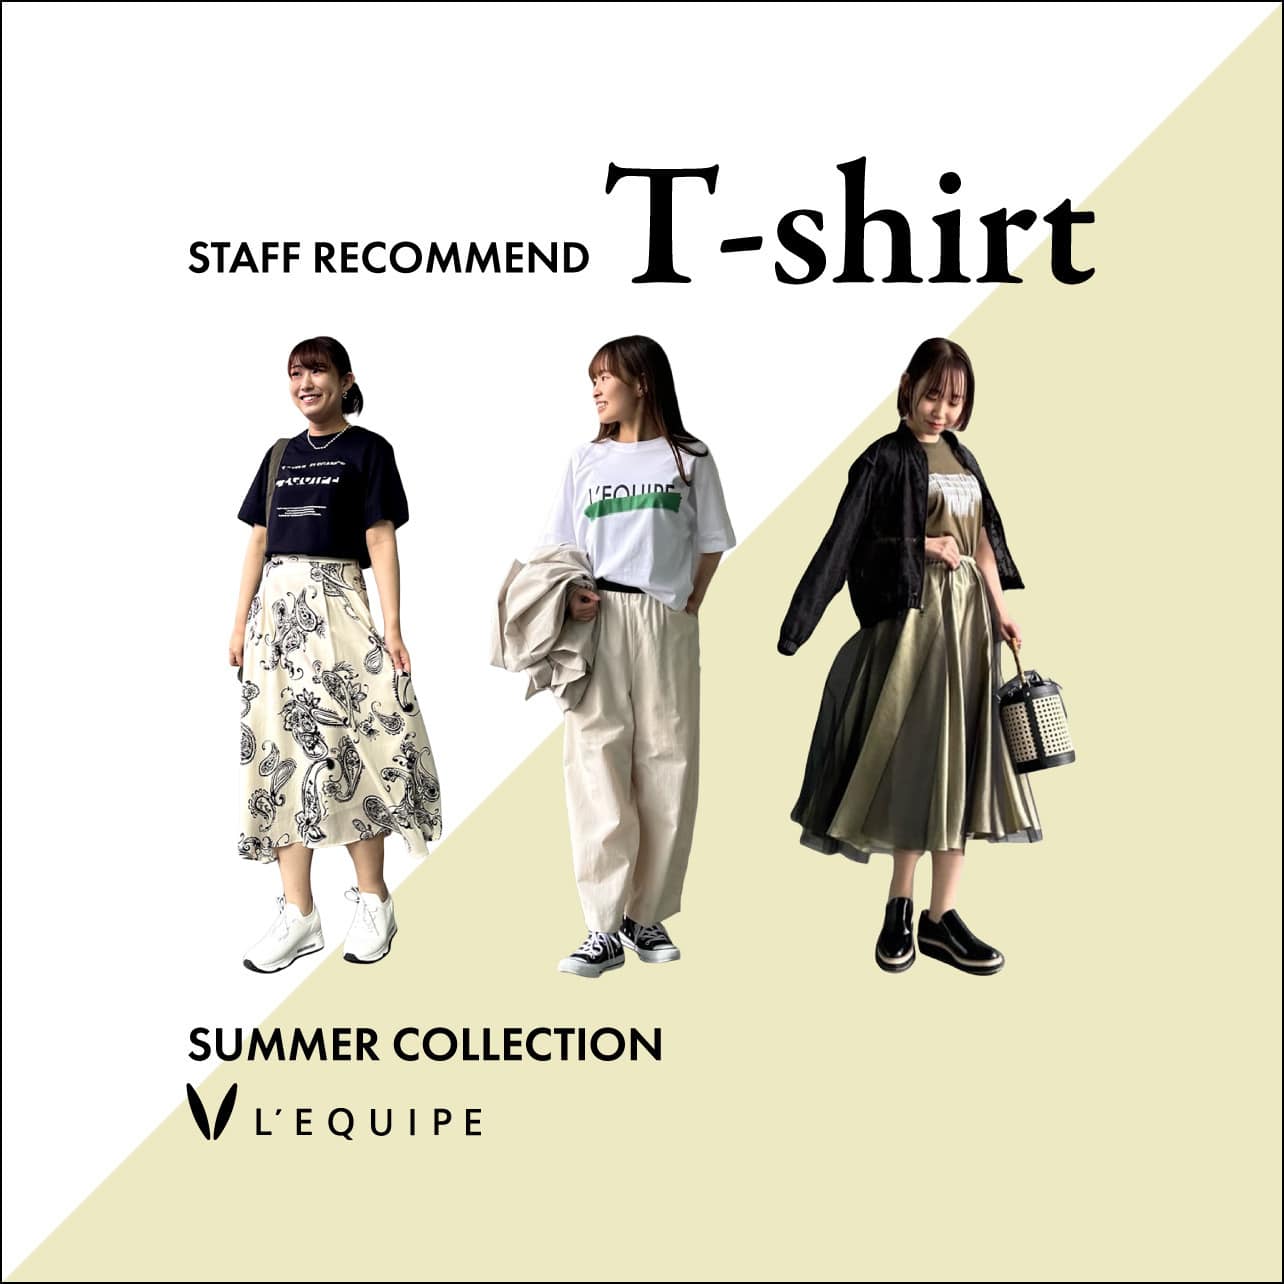 STAFF RECOMMEND”T-shirt”